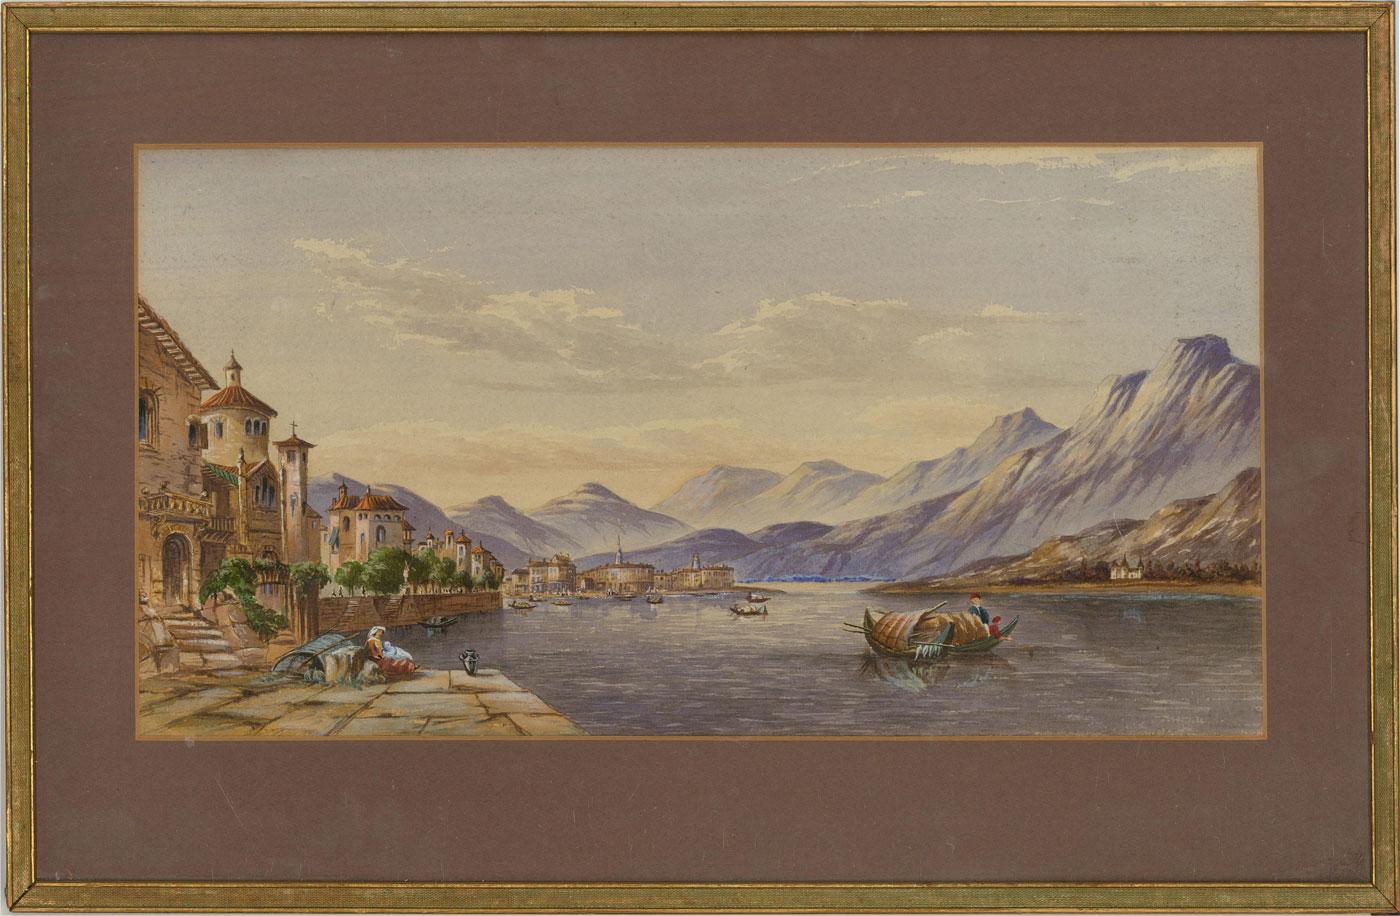 A beautiful Italian lake view, showing a charming lakeside town, the water busy with boats. The lake is surrounded by an impressive mountain range. The painting is unsigned and presented in a contemporary gilt frame with thin linen cove. brown card